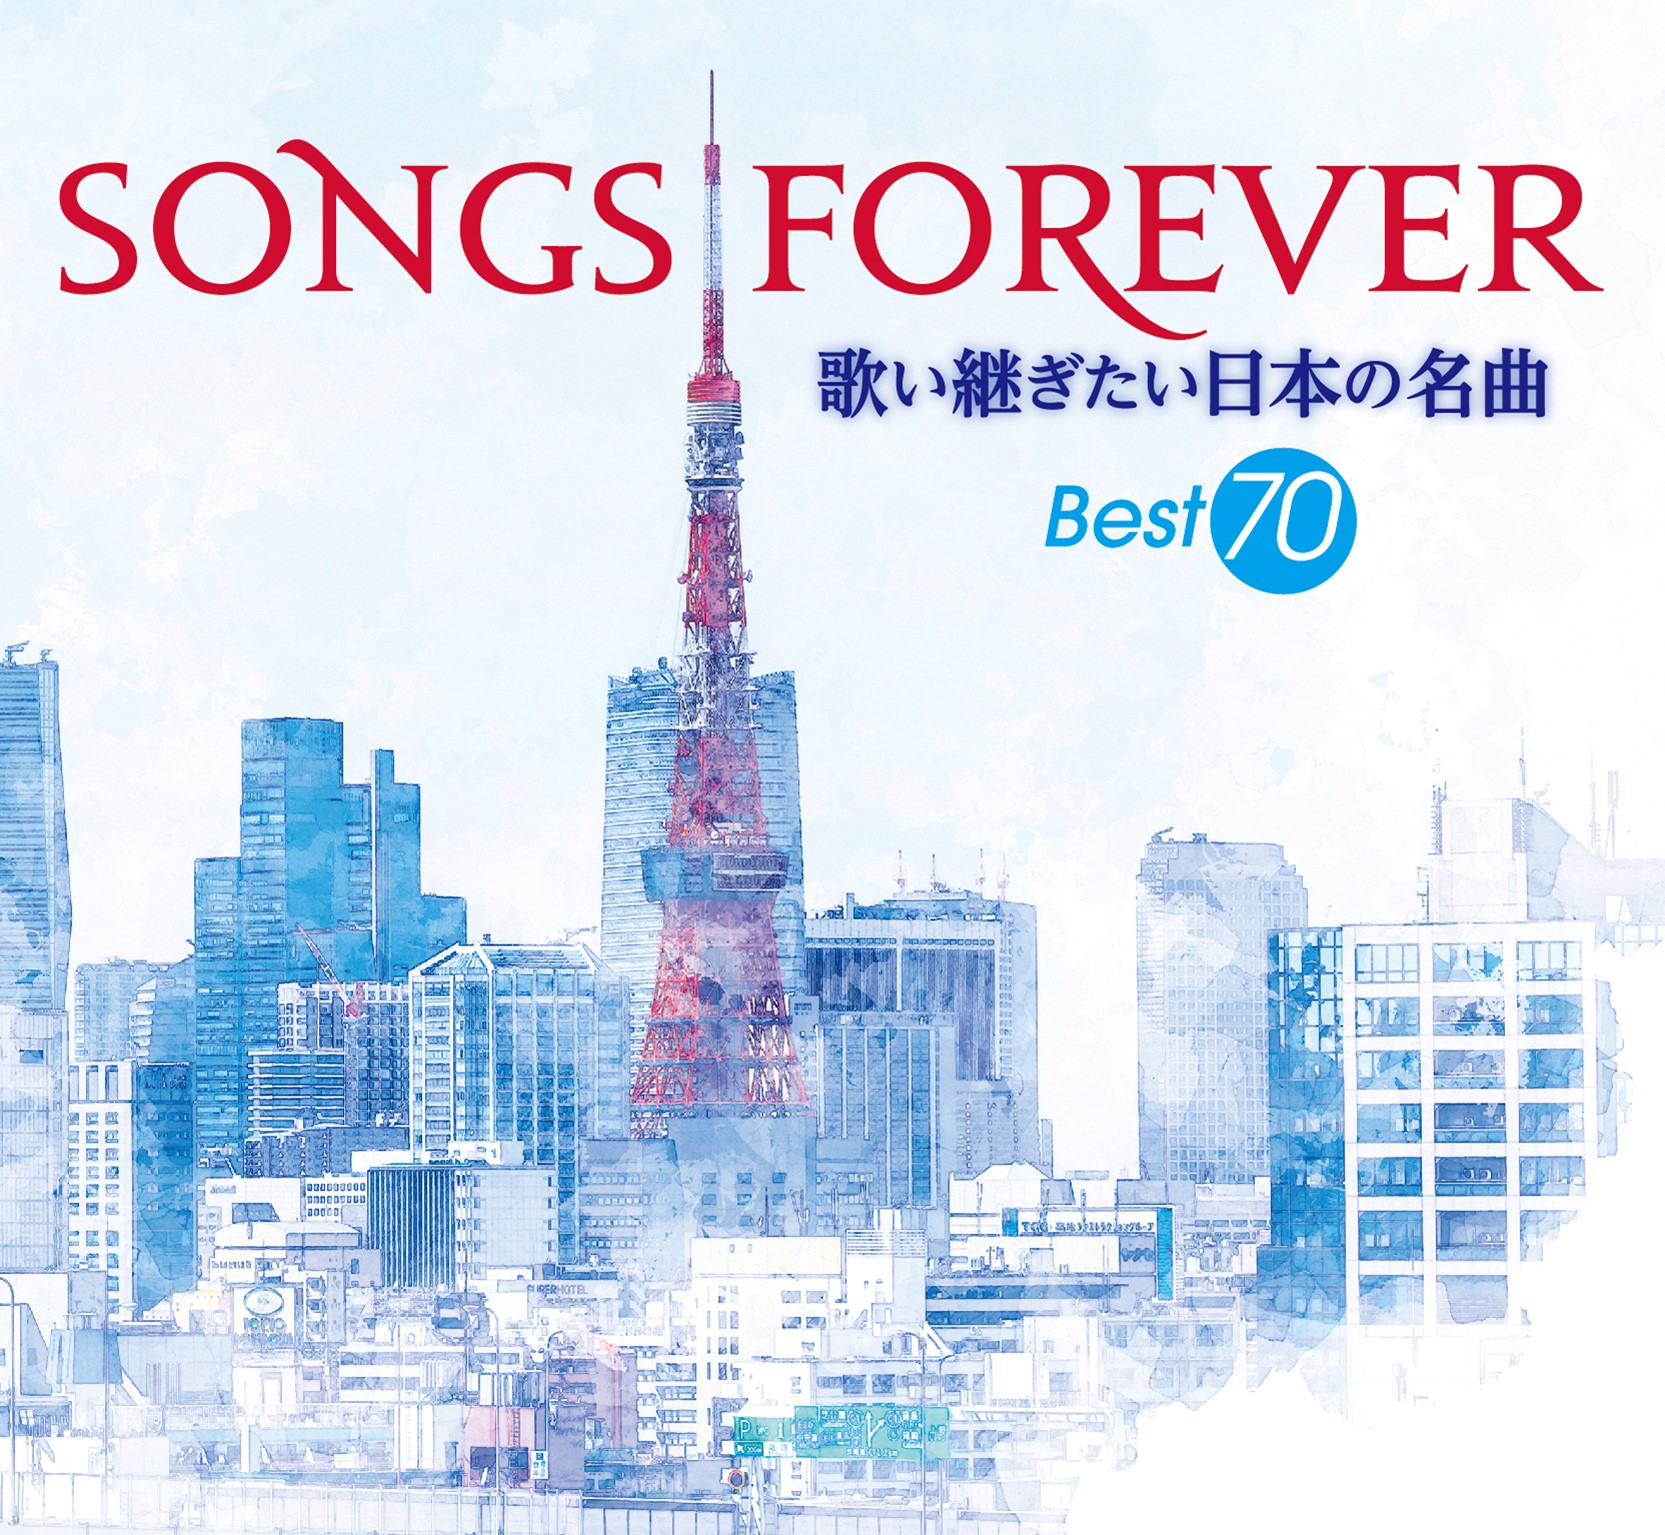 SONGS FOREVER 歌い継ぎたい日本の名曲 Best70とPart2 - 邦楽